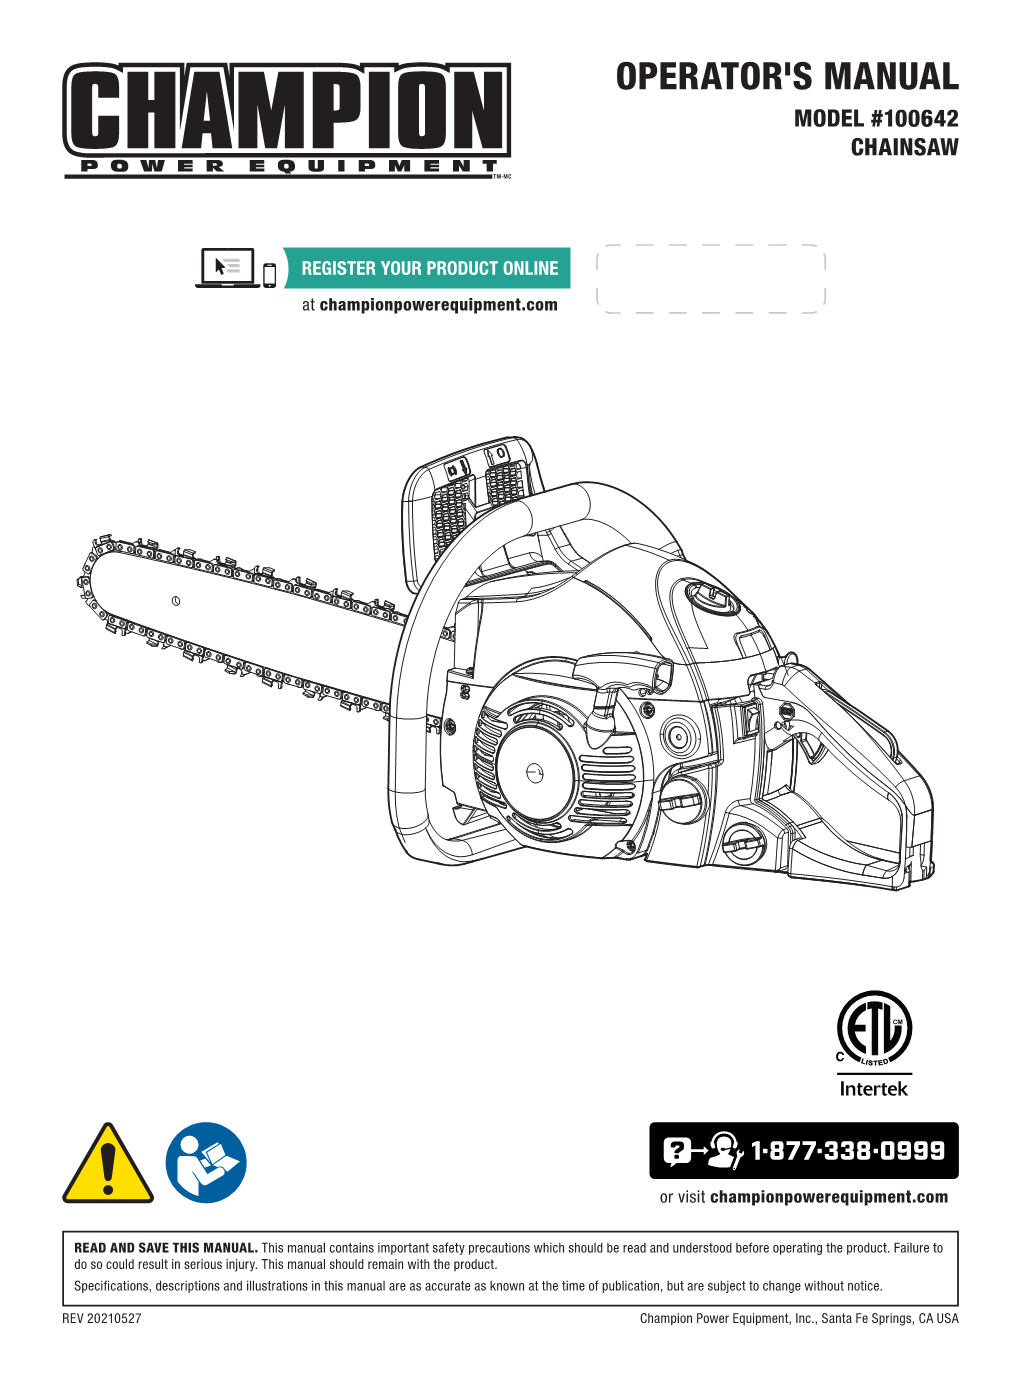 OPERATOR's MANUAL MODEL #100642 Chainsaw